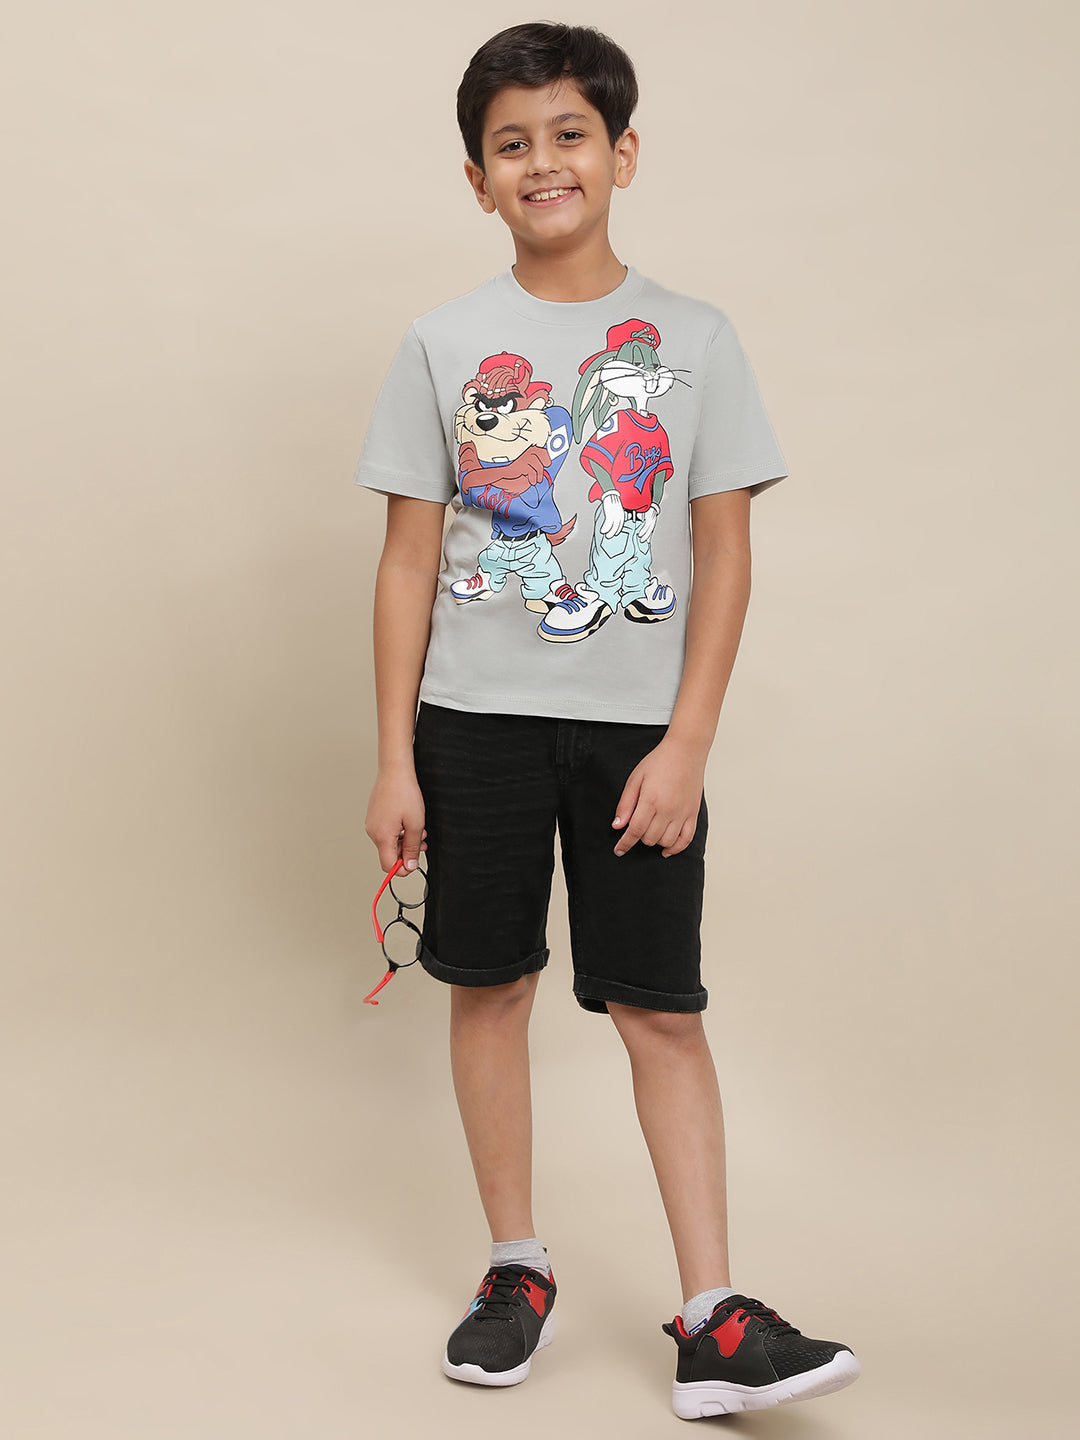 Kidsville Looney Tunes Printed Blue Tshirt For Boys